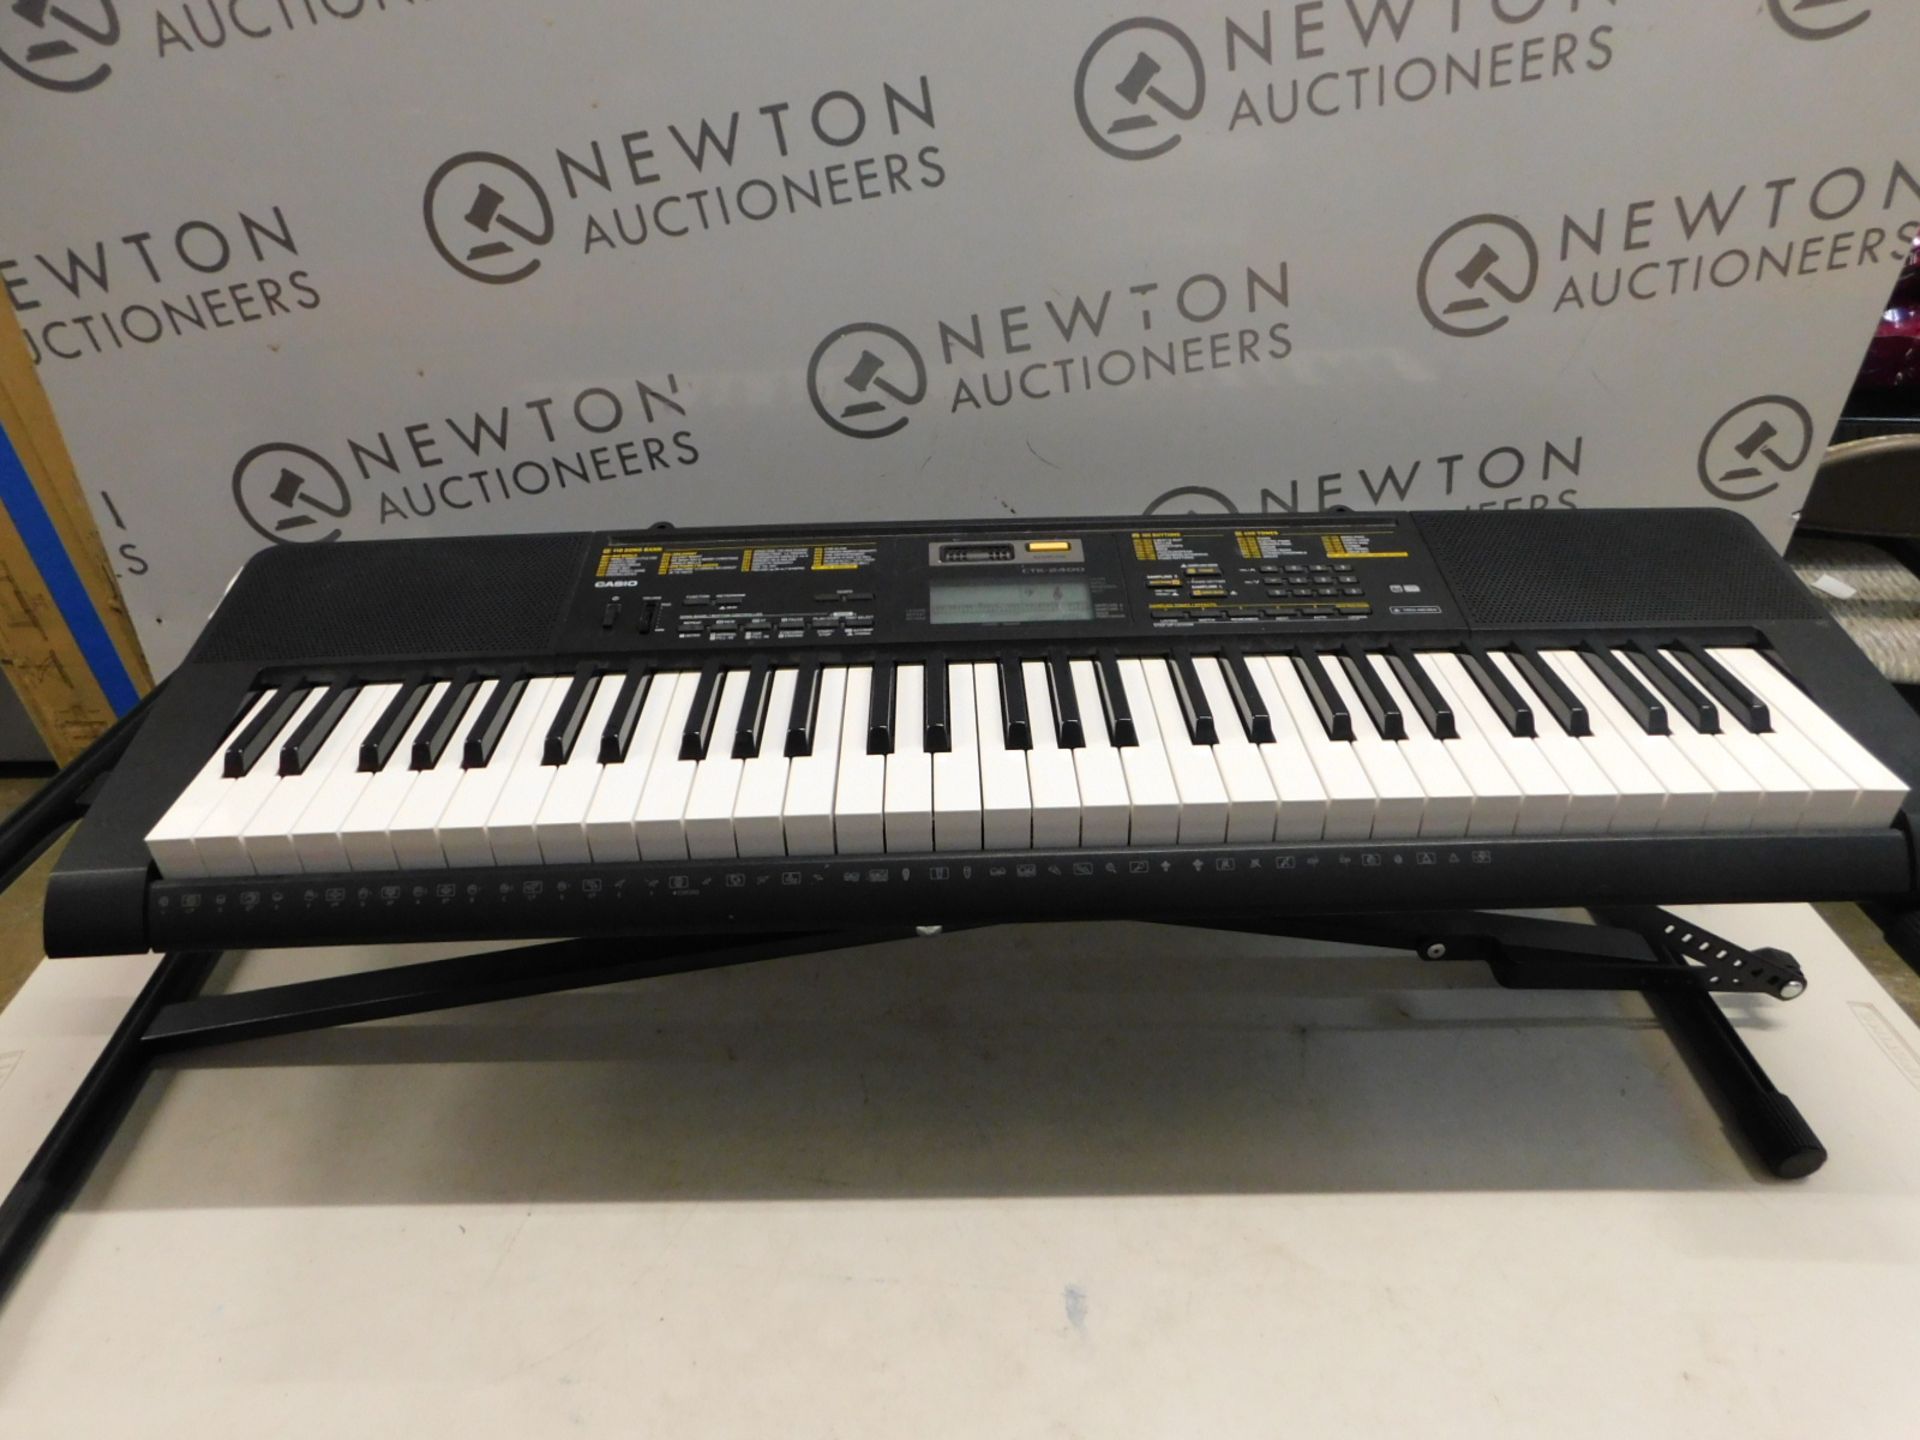 1 CASIO CTK-2400 DIGITAL KEYBOARD WITH STAND RRP £149.99